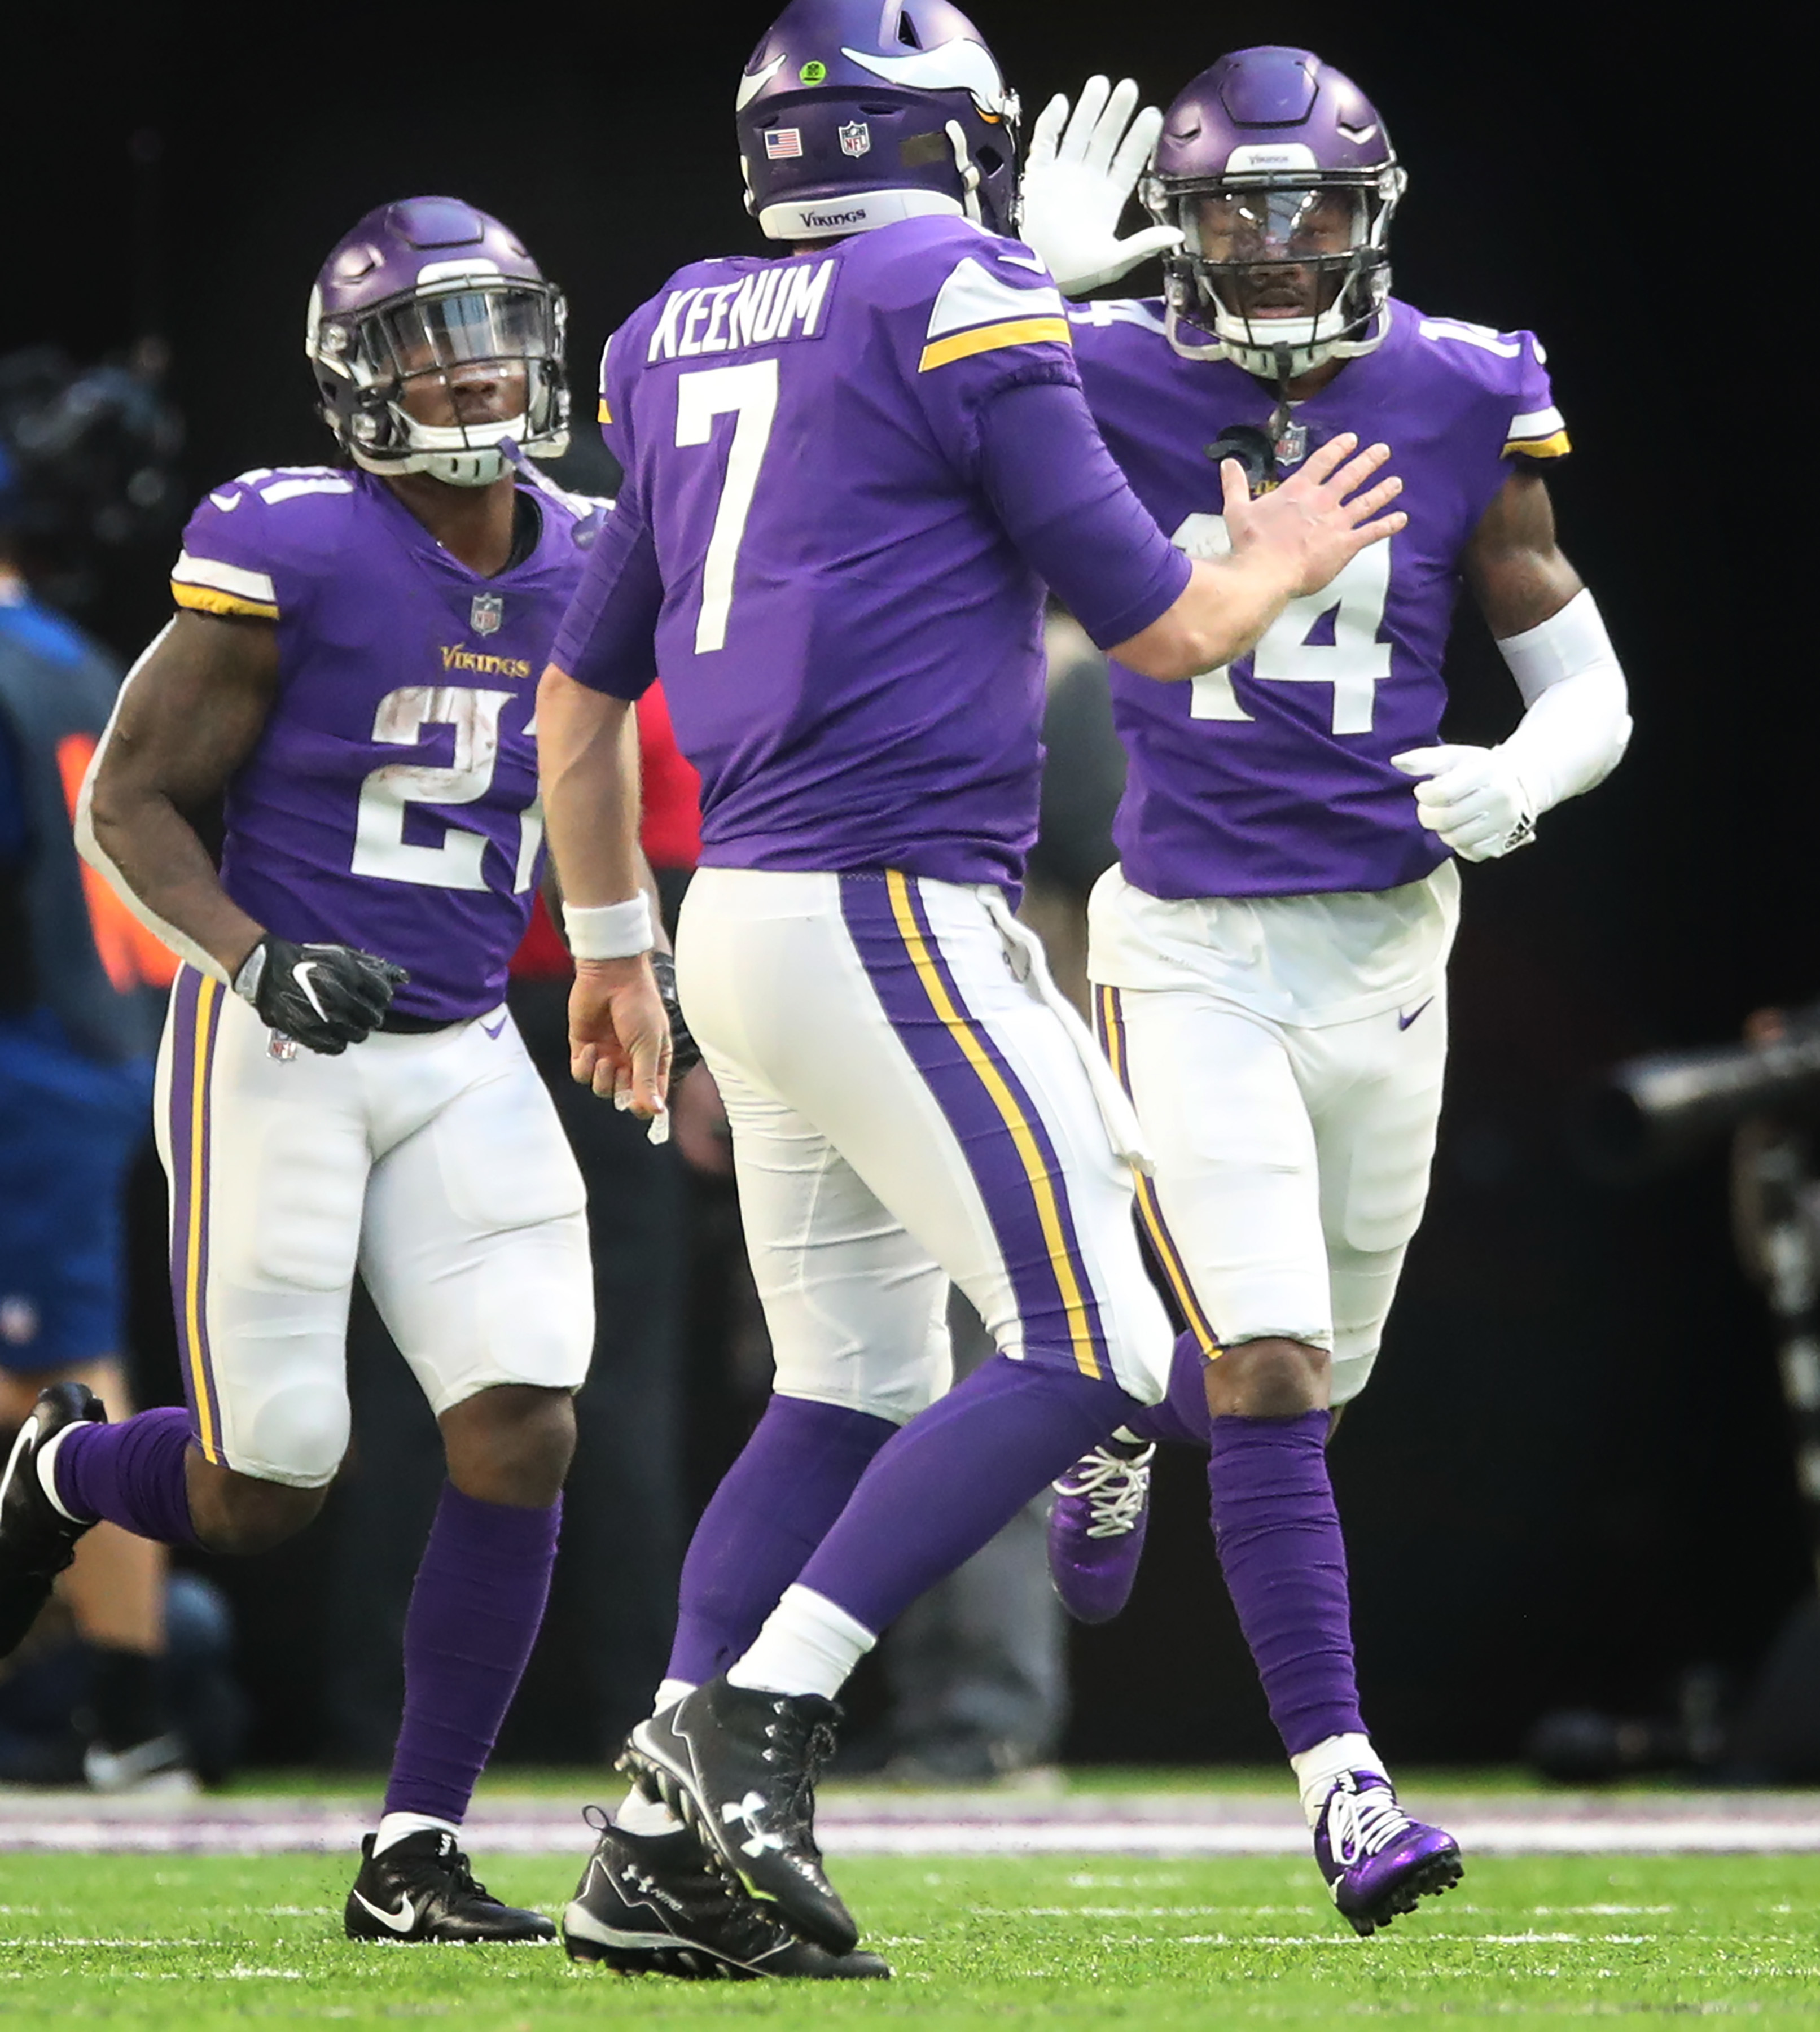 Minnesota Vikings quarterback Case Keenum (7) left celebrated Minnesota Vikings wide receiver Stefon Diggs (14) 15 yard touch down catch in the third quater at U.S. Bank Stadium Sunday December 31, 2017 in Minneapolis, MN.] JERRY HOLT ‚Ä¢ jerry.holt@s